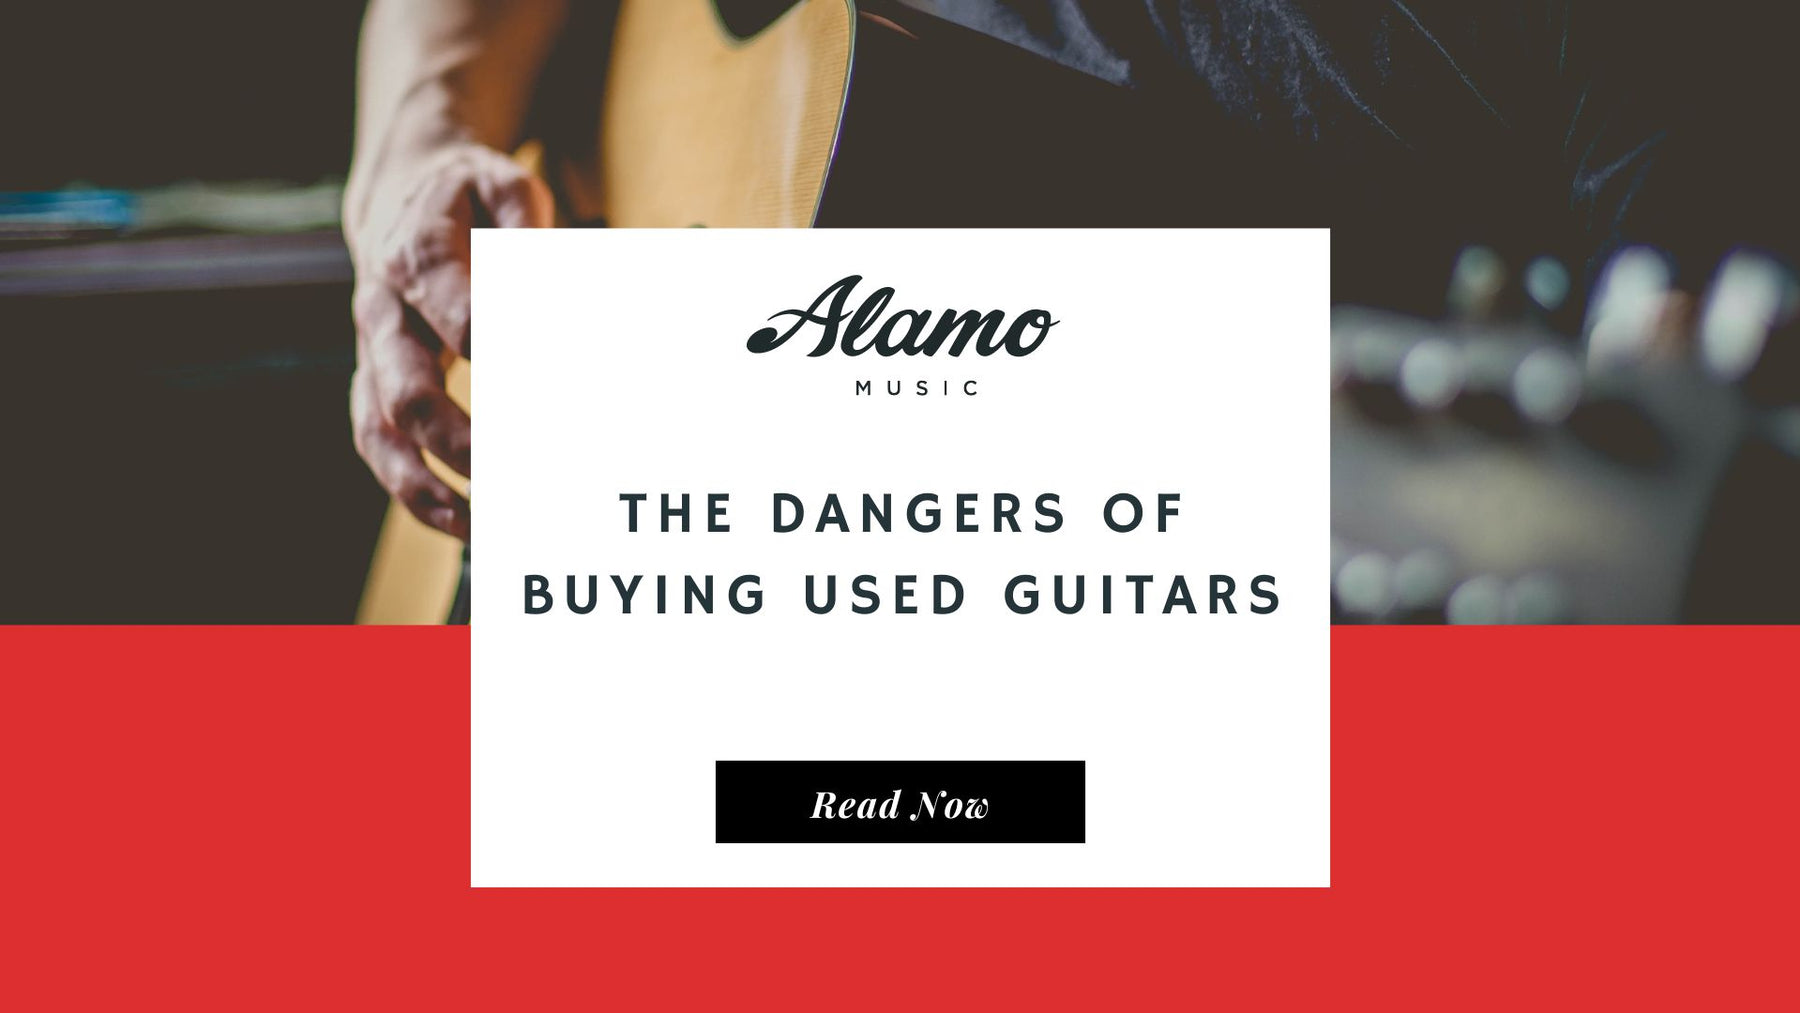 The Dangers of Buying Used Guitars